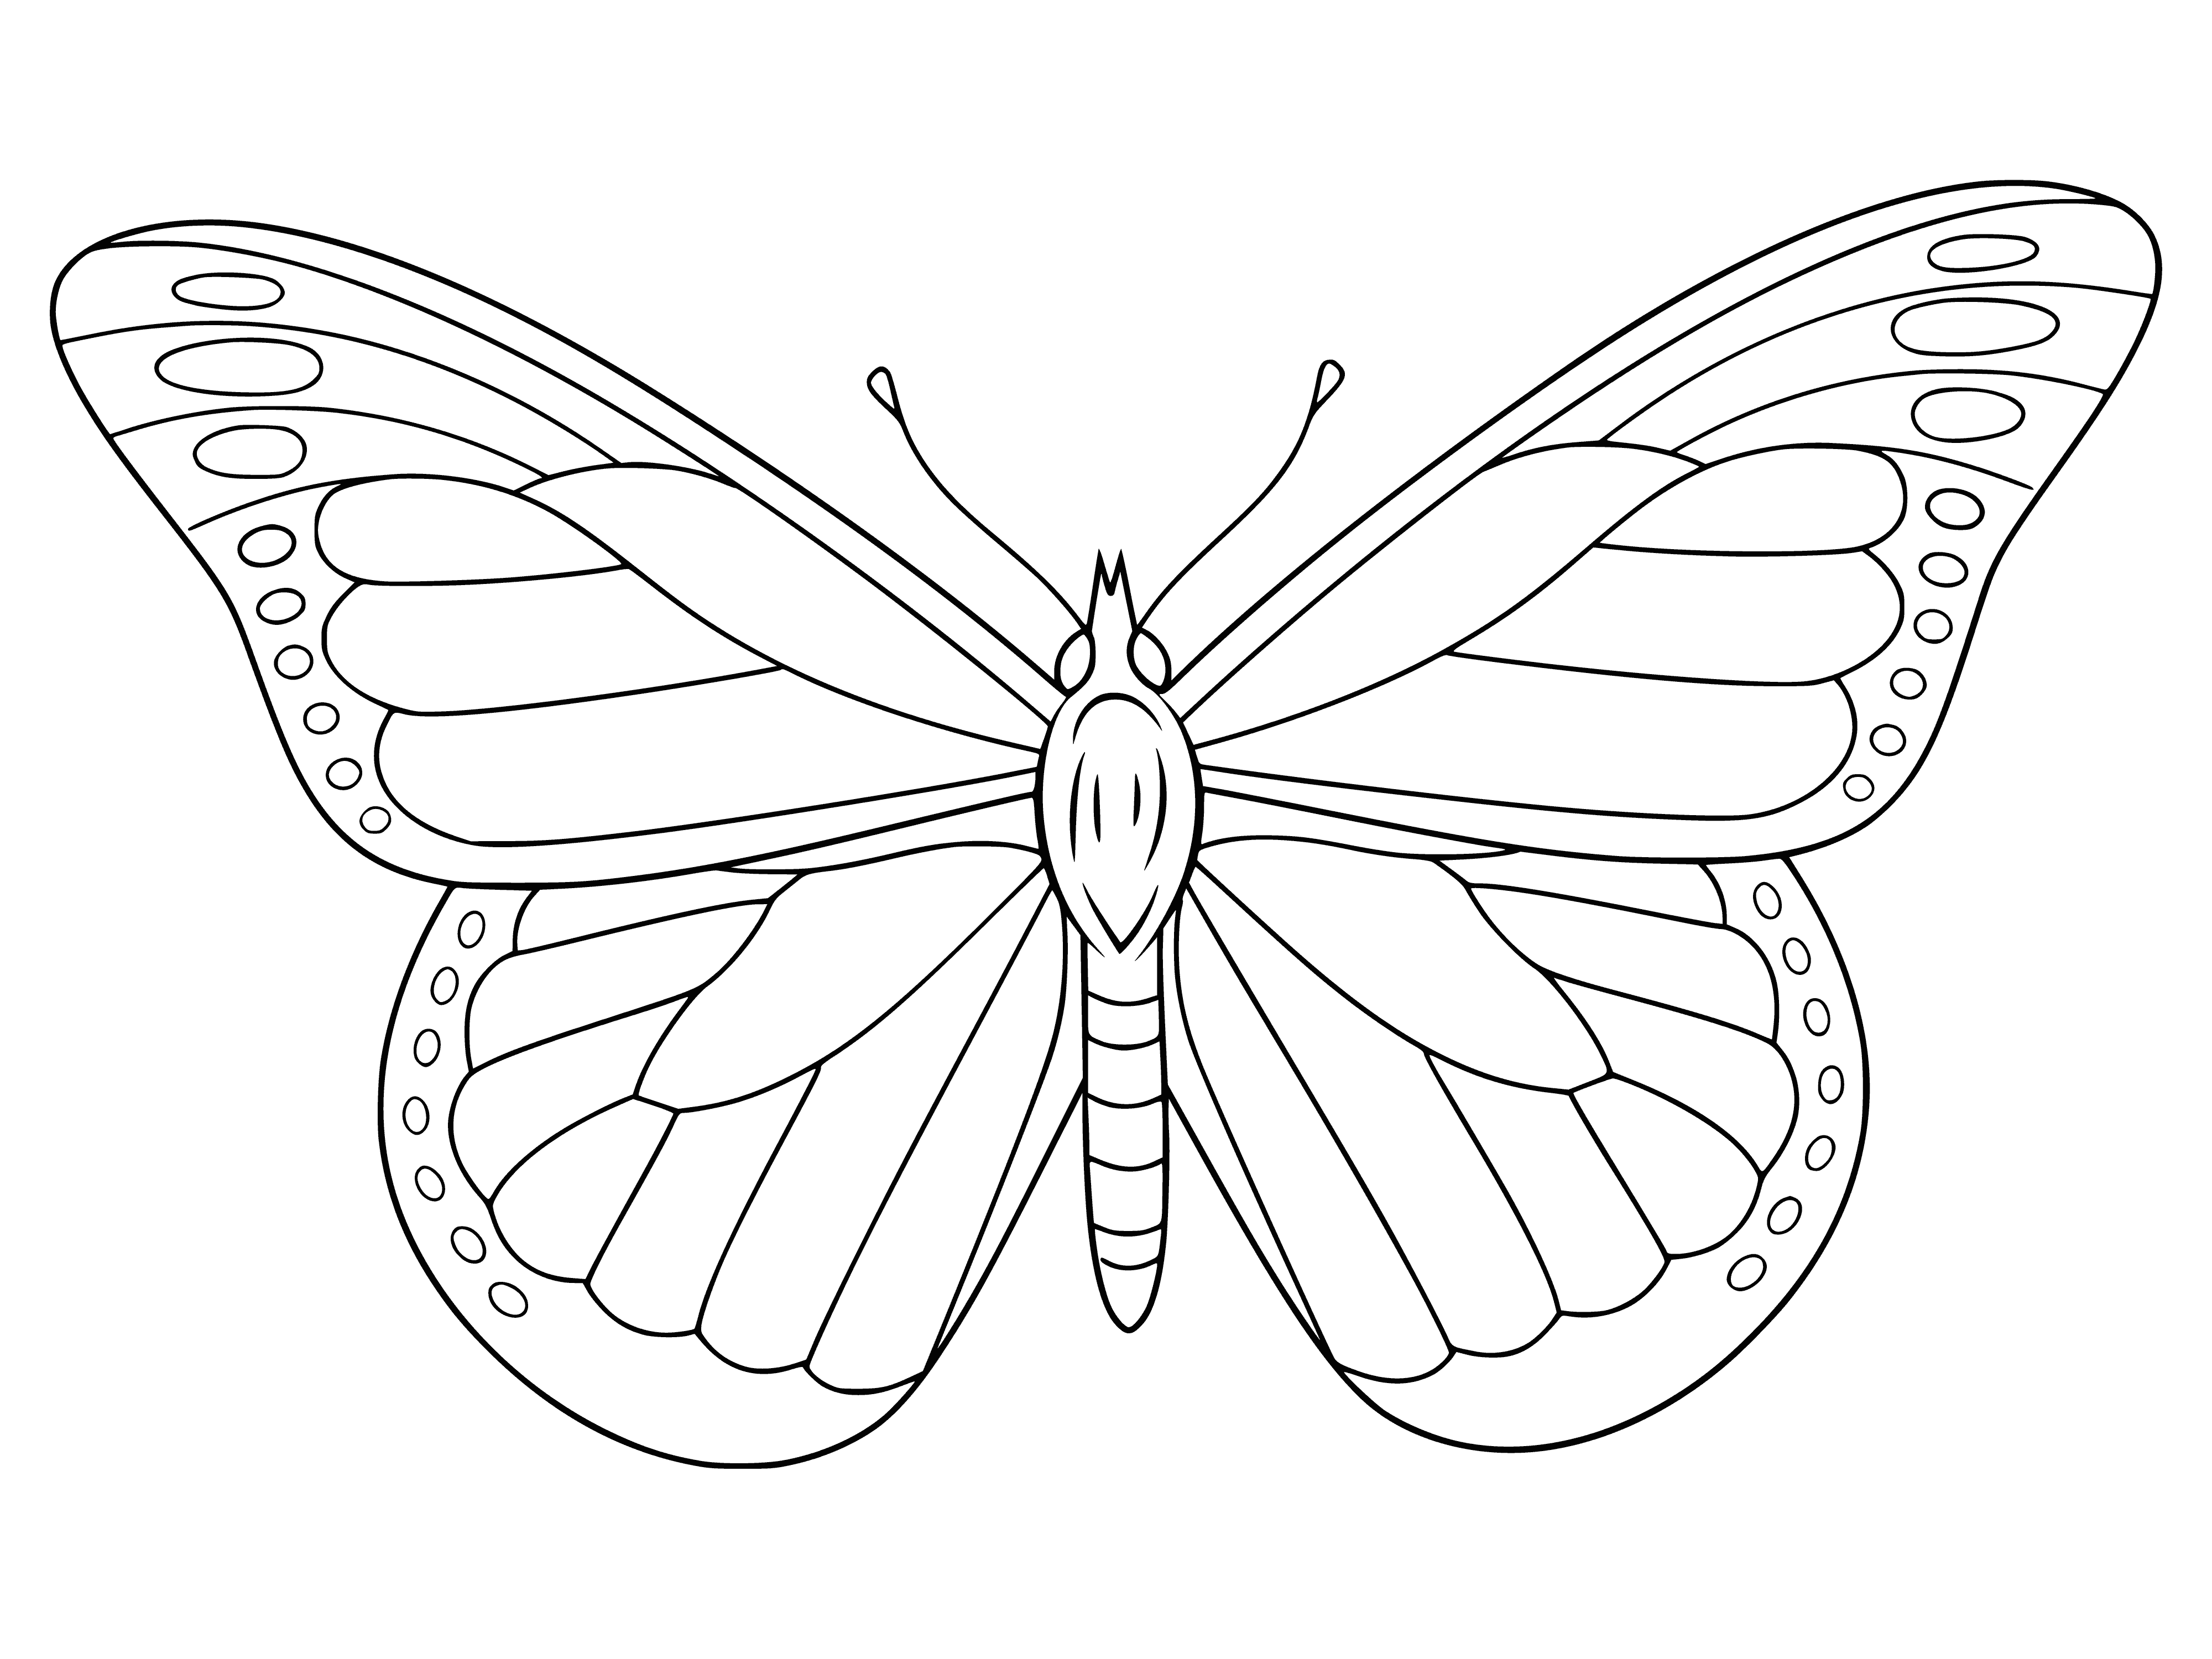 coloring page: Close-up of colorful butterfly's wings- left yellow with black spots; right black with yellow spots; body black & white. #Butterfly